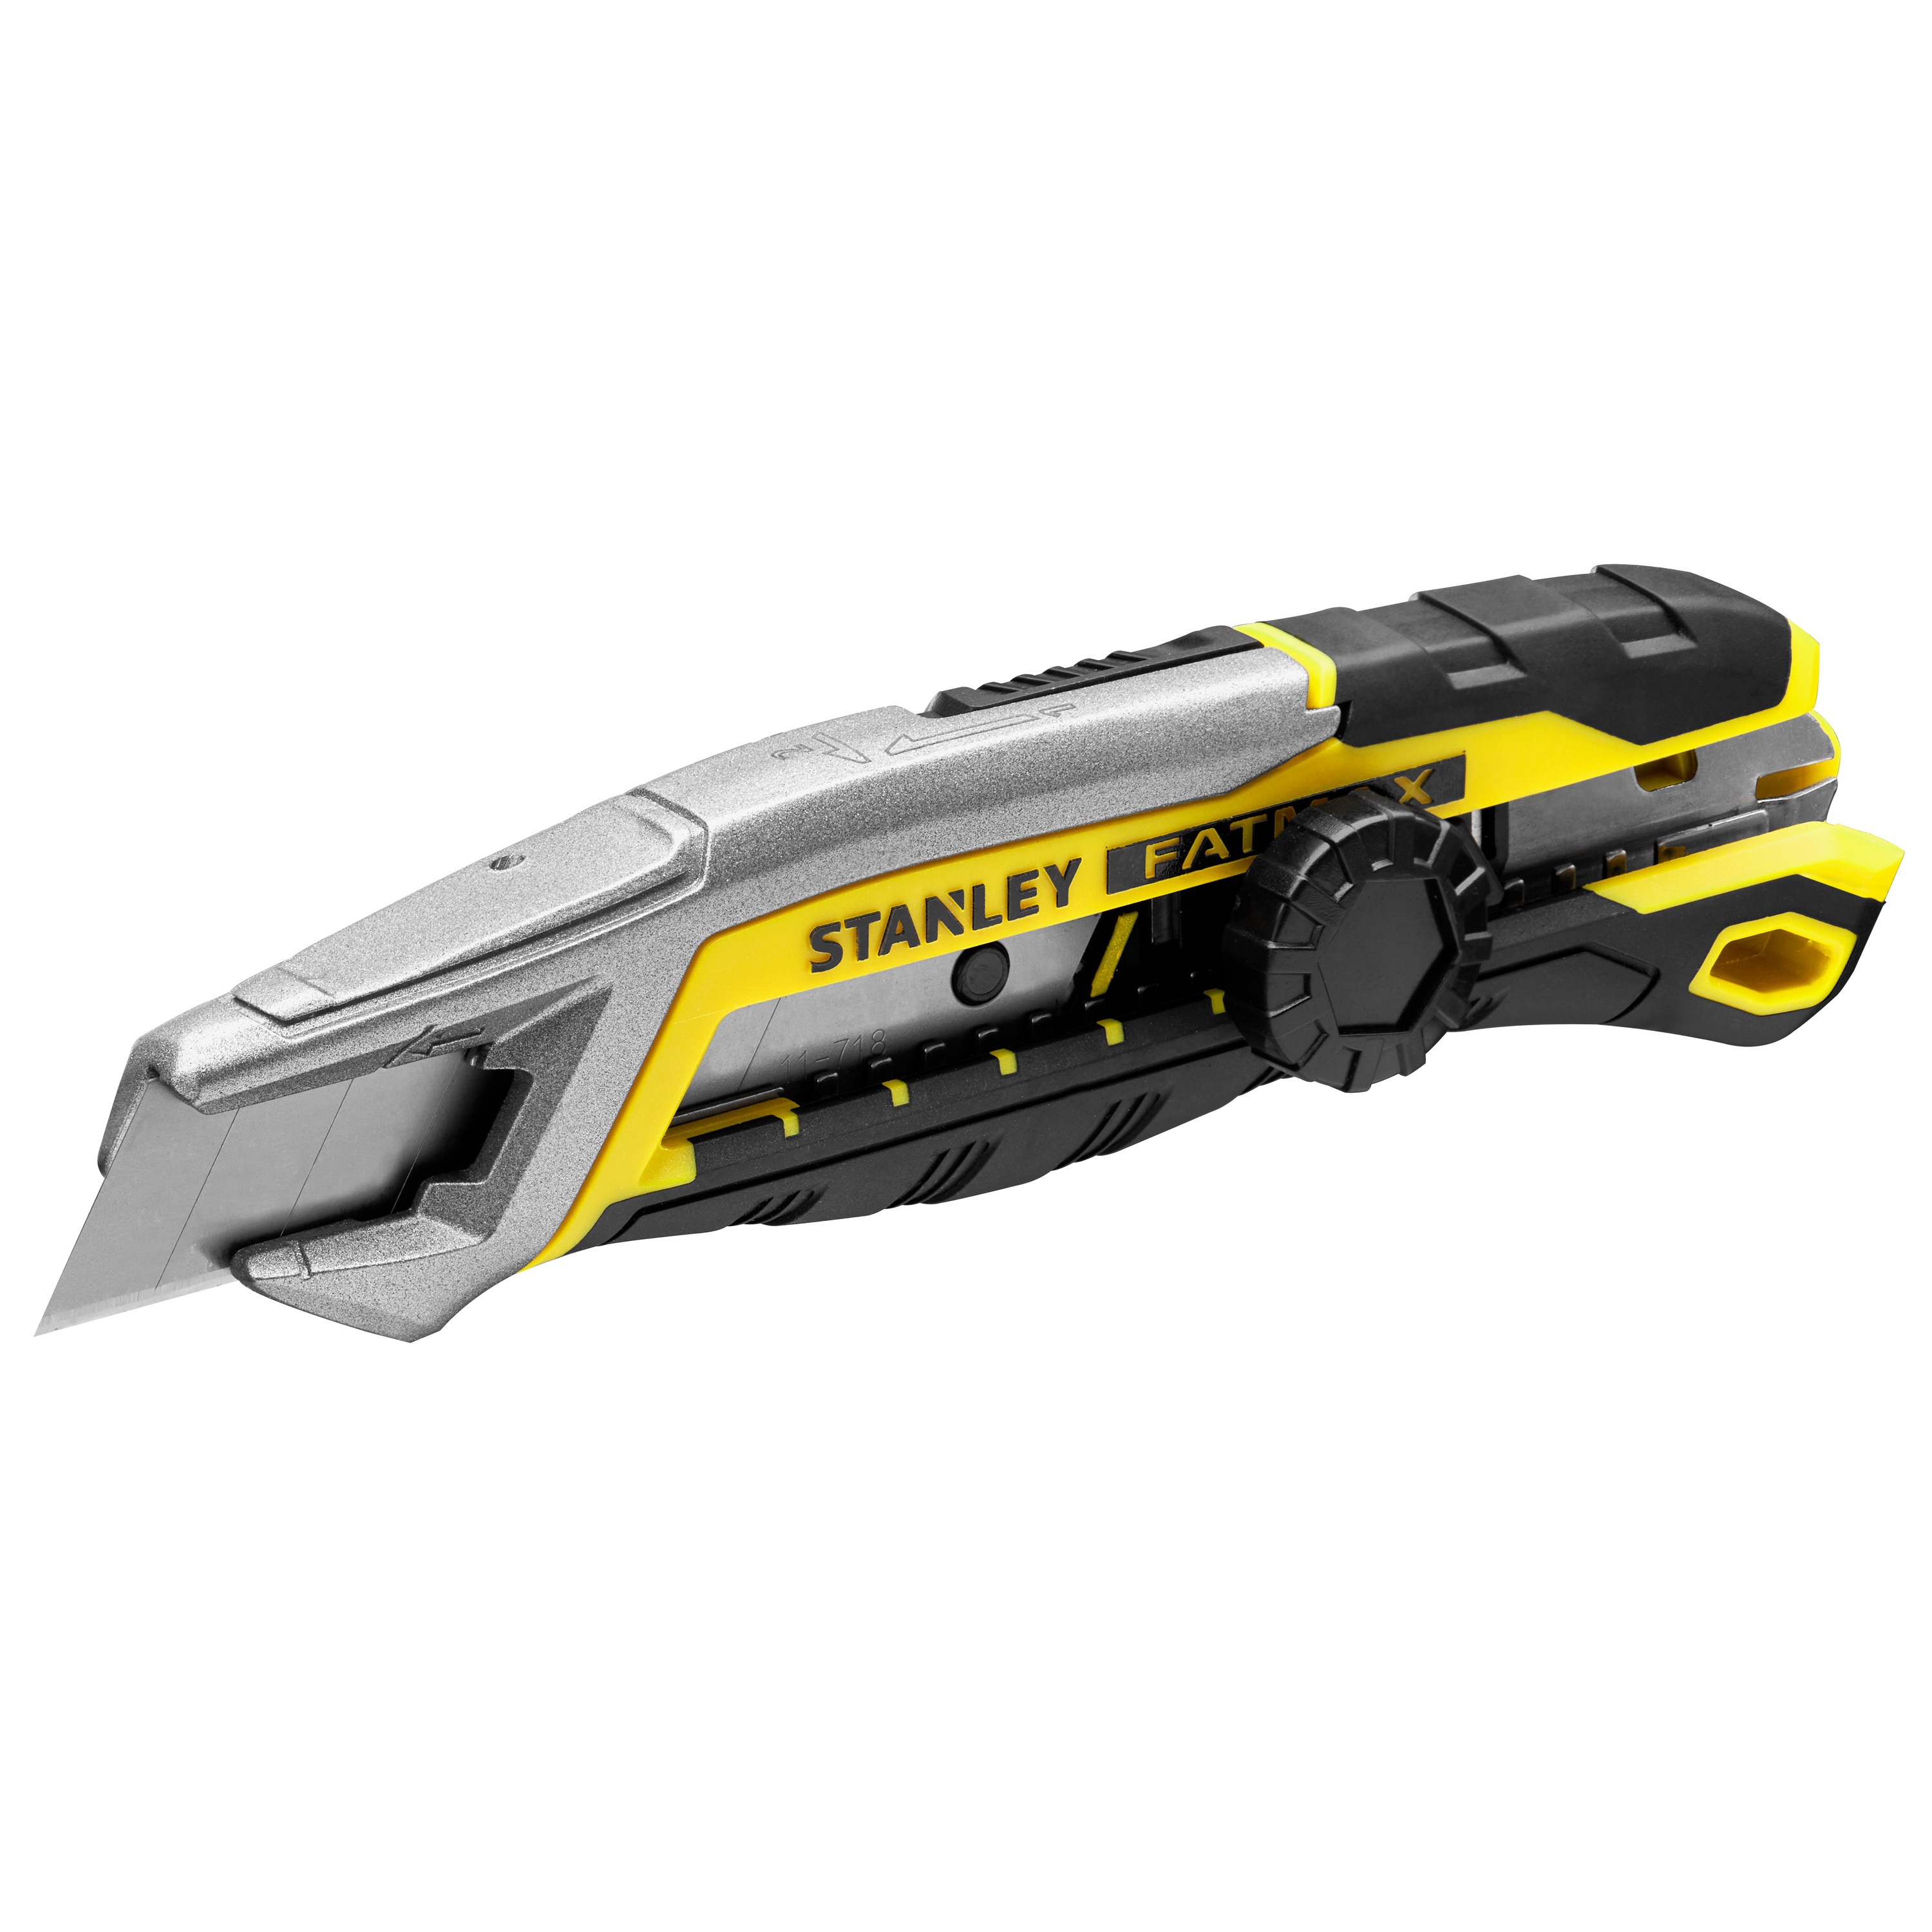 Stanley Tools - FATMAX 18 mm SnapOff Knife with Wheel Lock - FMHT10592-0